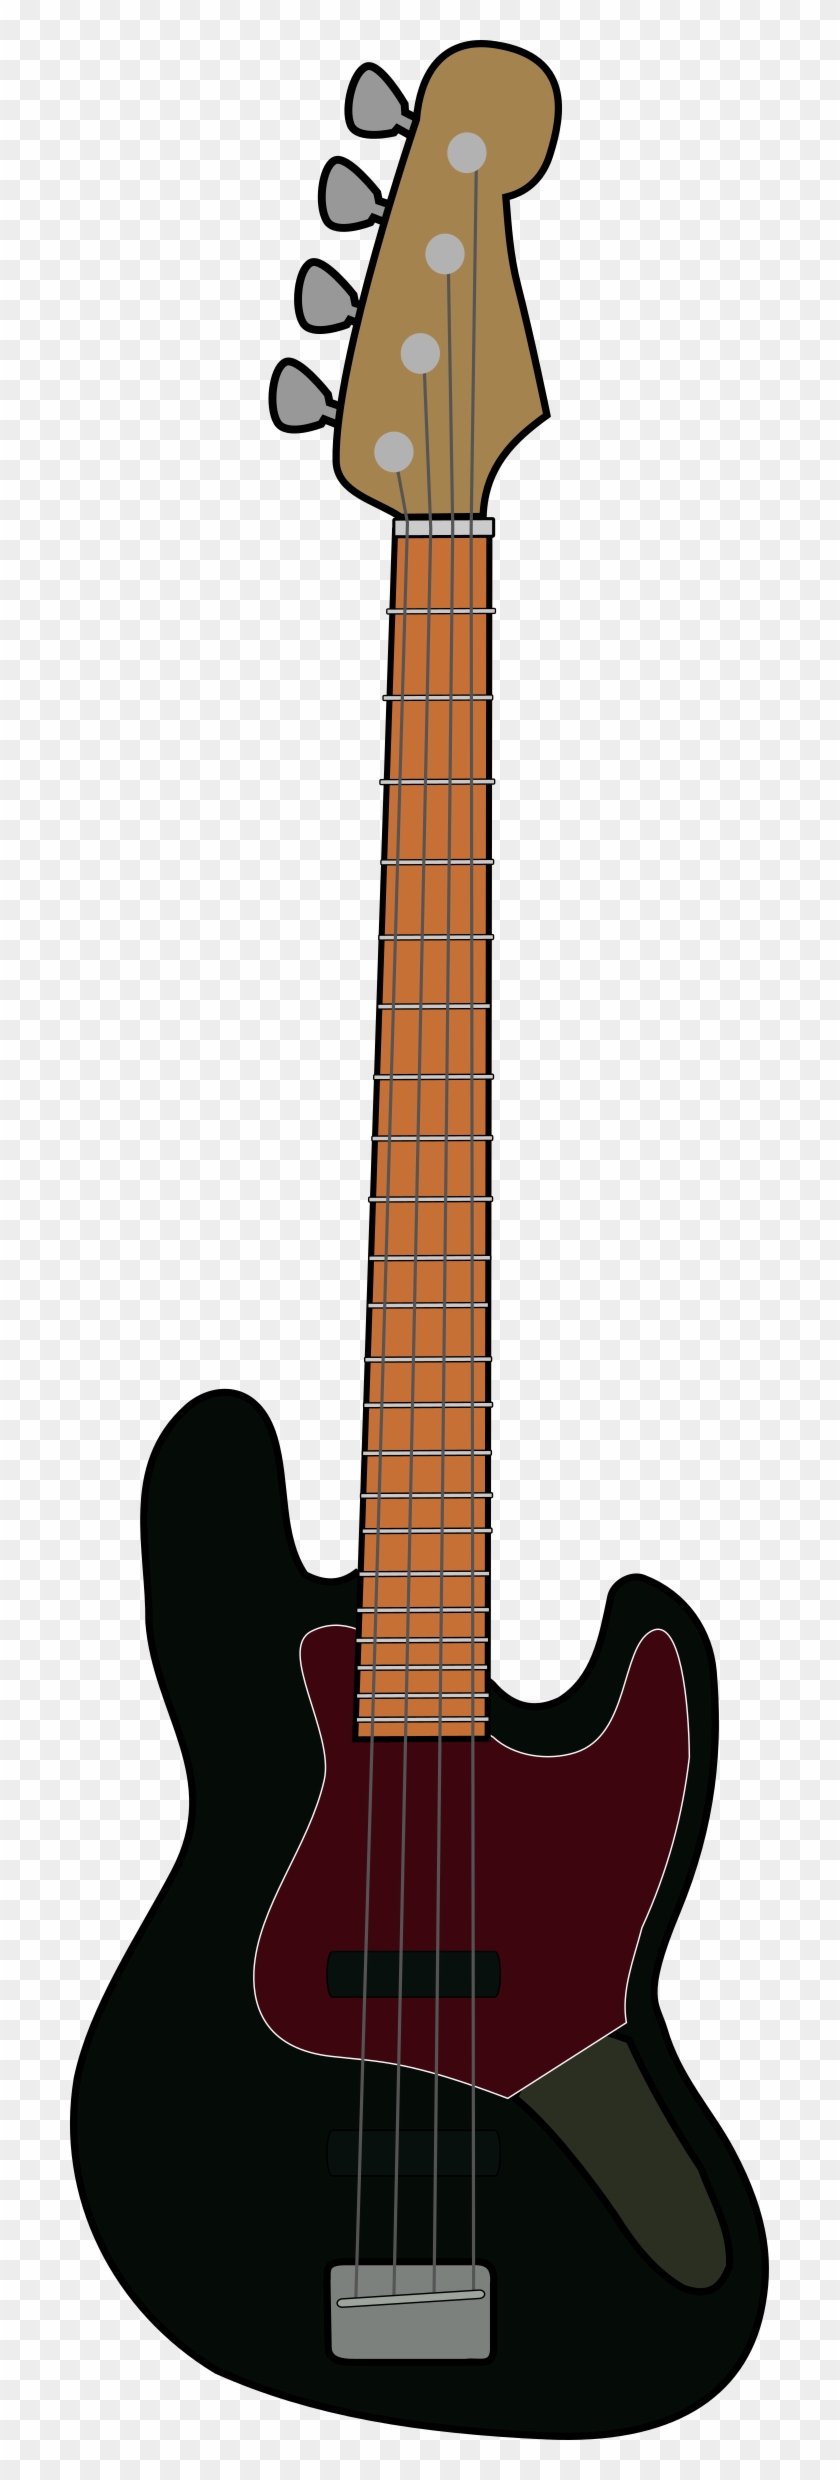 This Free Icons Png Design Of Fender Jazz Bass Clipart #819269